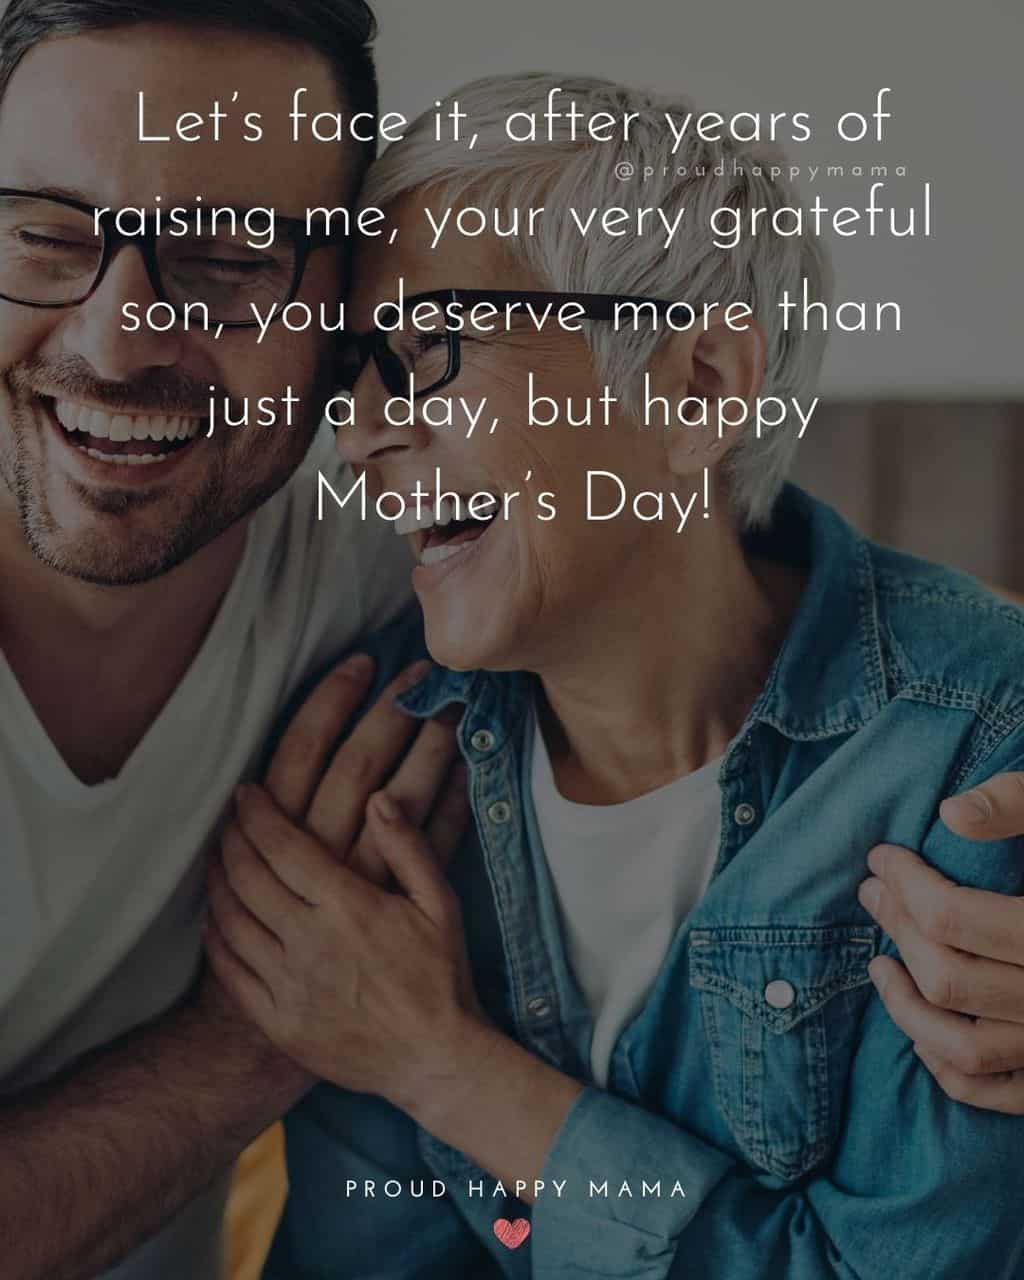 Happy Mothers Day Quotes From Son - Let’s face it, after years of raising me, your very grateful son, you deserve more than just